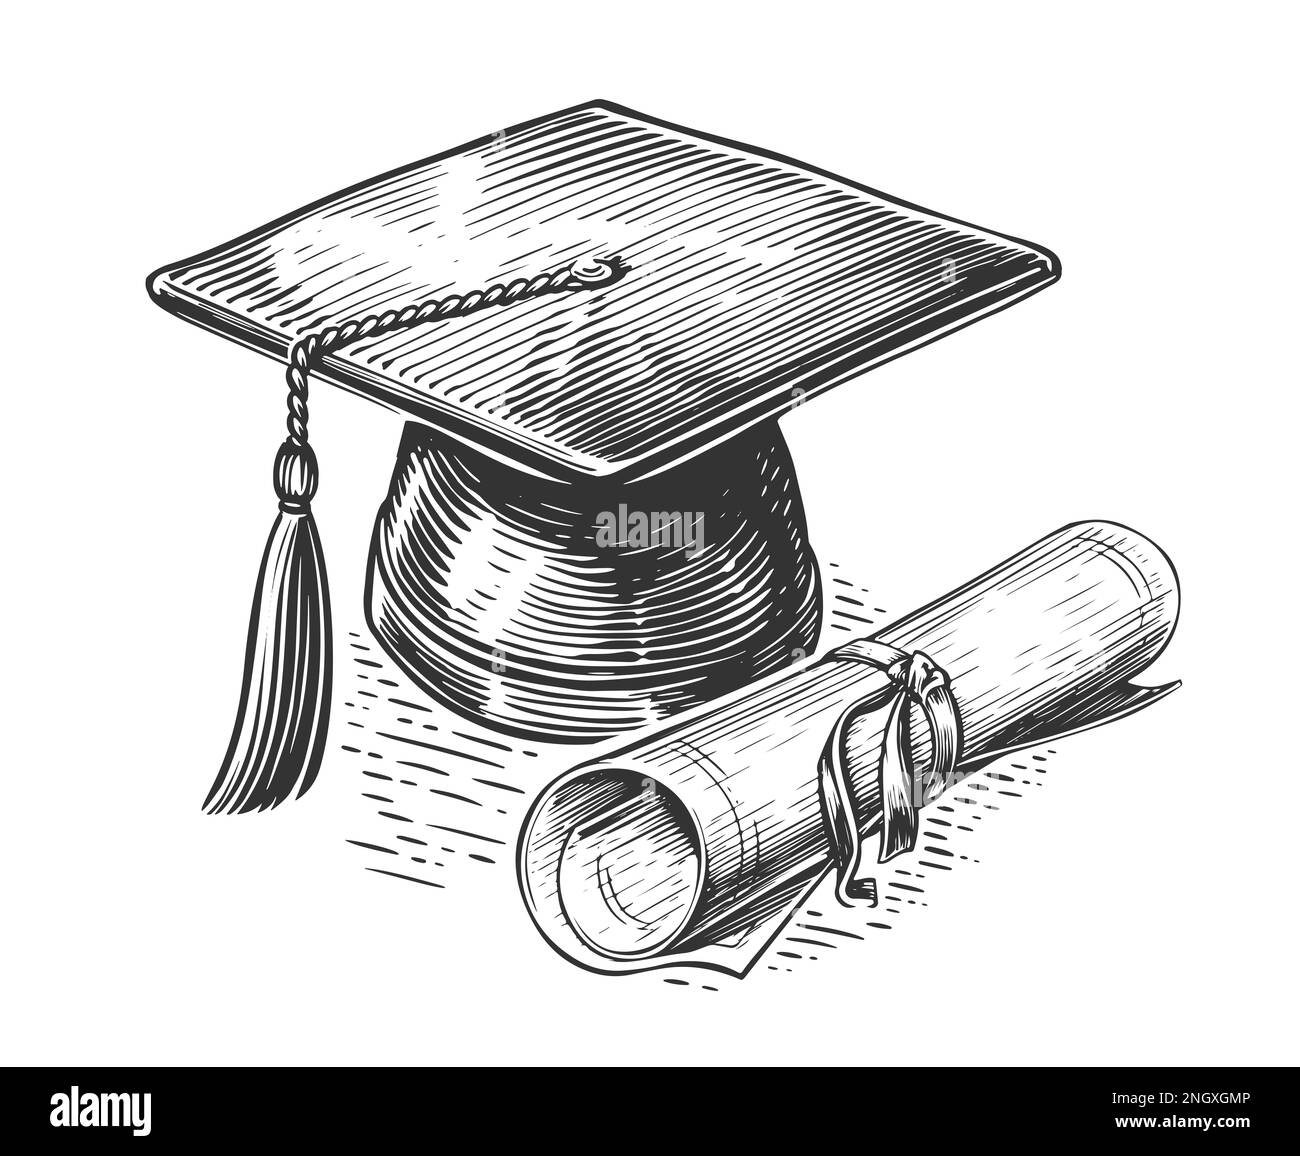 Graduation cap with tassel and rolled diploma. Mortarboard and Degree. Sketch illustration Stock Photo